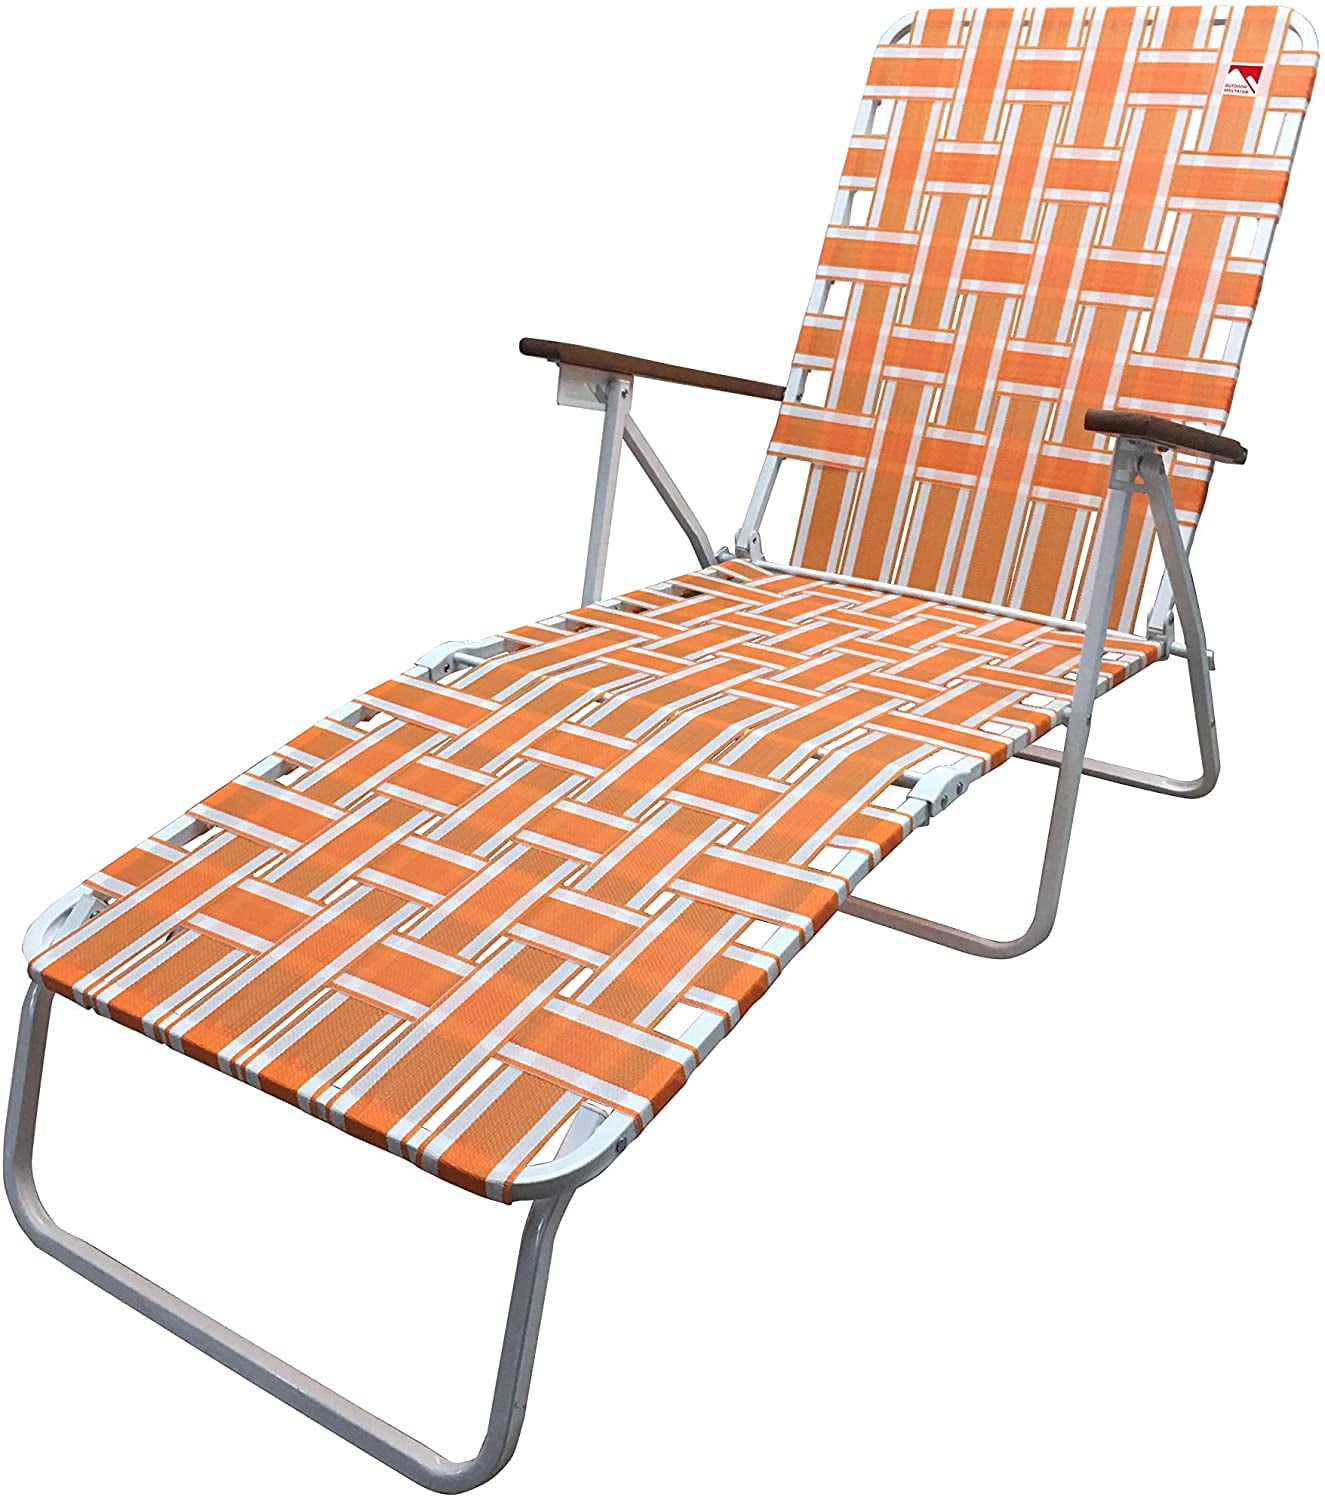 Sale > chaise lounges at walmart > in stock